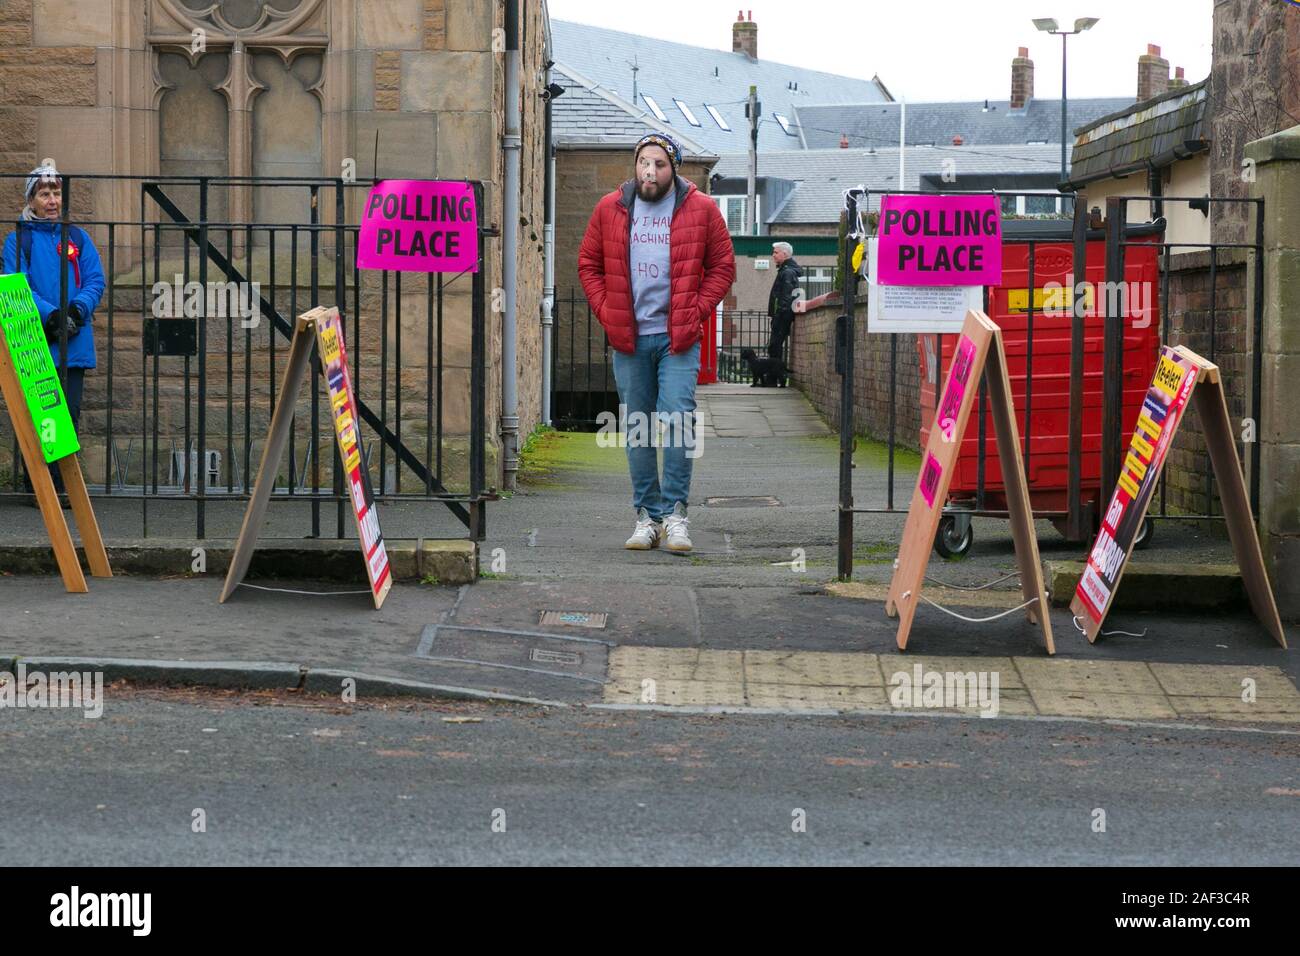 Edinburgh, Scotland, 12th December 2019. A single man exits the polling station after casting his vote in the UK's winter General Election. Laour and SNP activists look on. Credit: Brian Wilson/Alamy Live News. Stock Photo